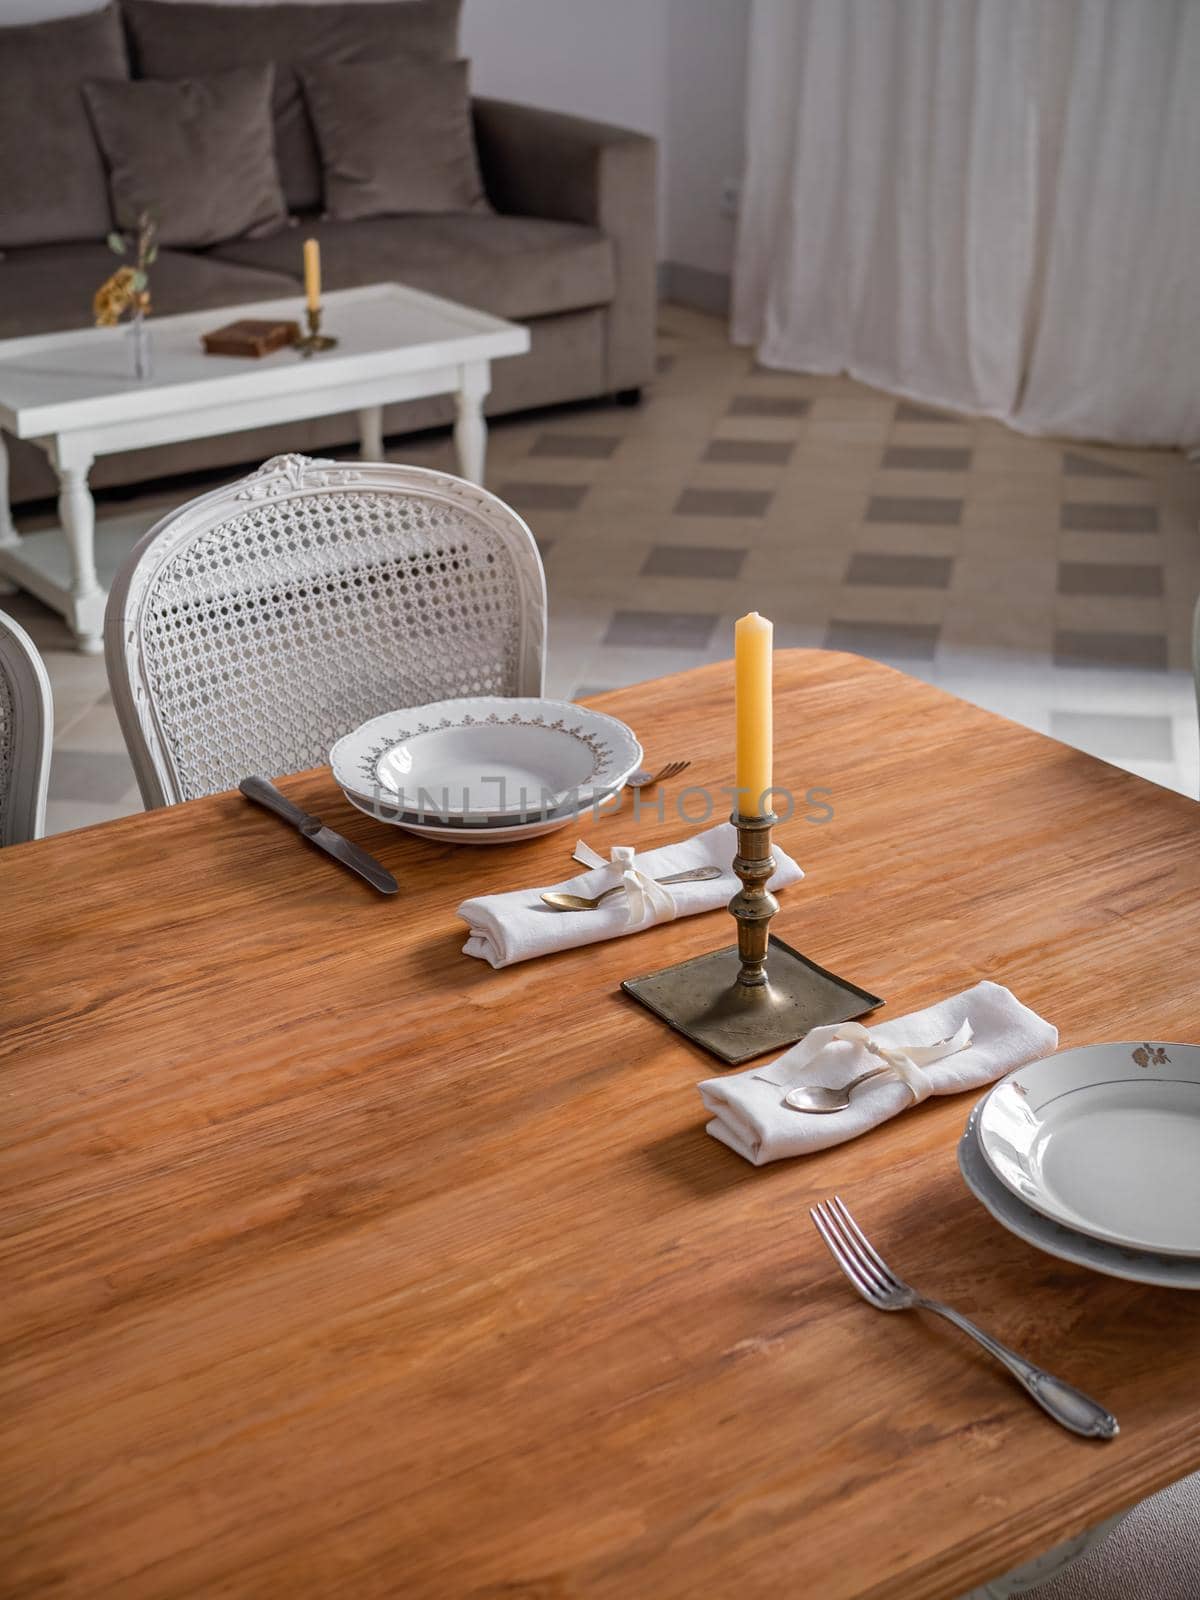 Wooden table setting for two persons, with plates, cutlery and old candlestick with candle. Interior of living room decorated in vintage style